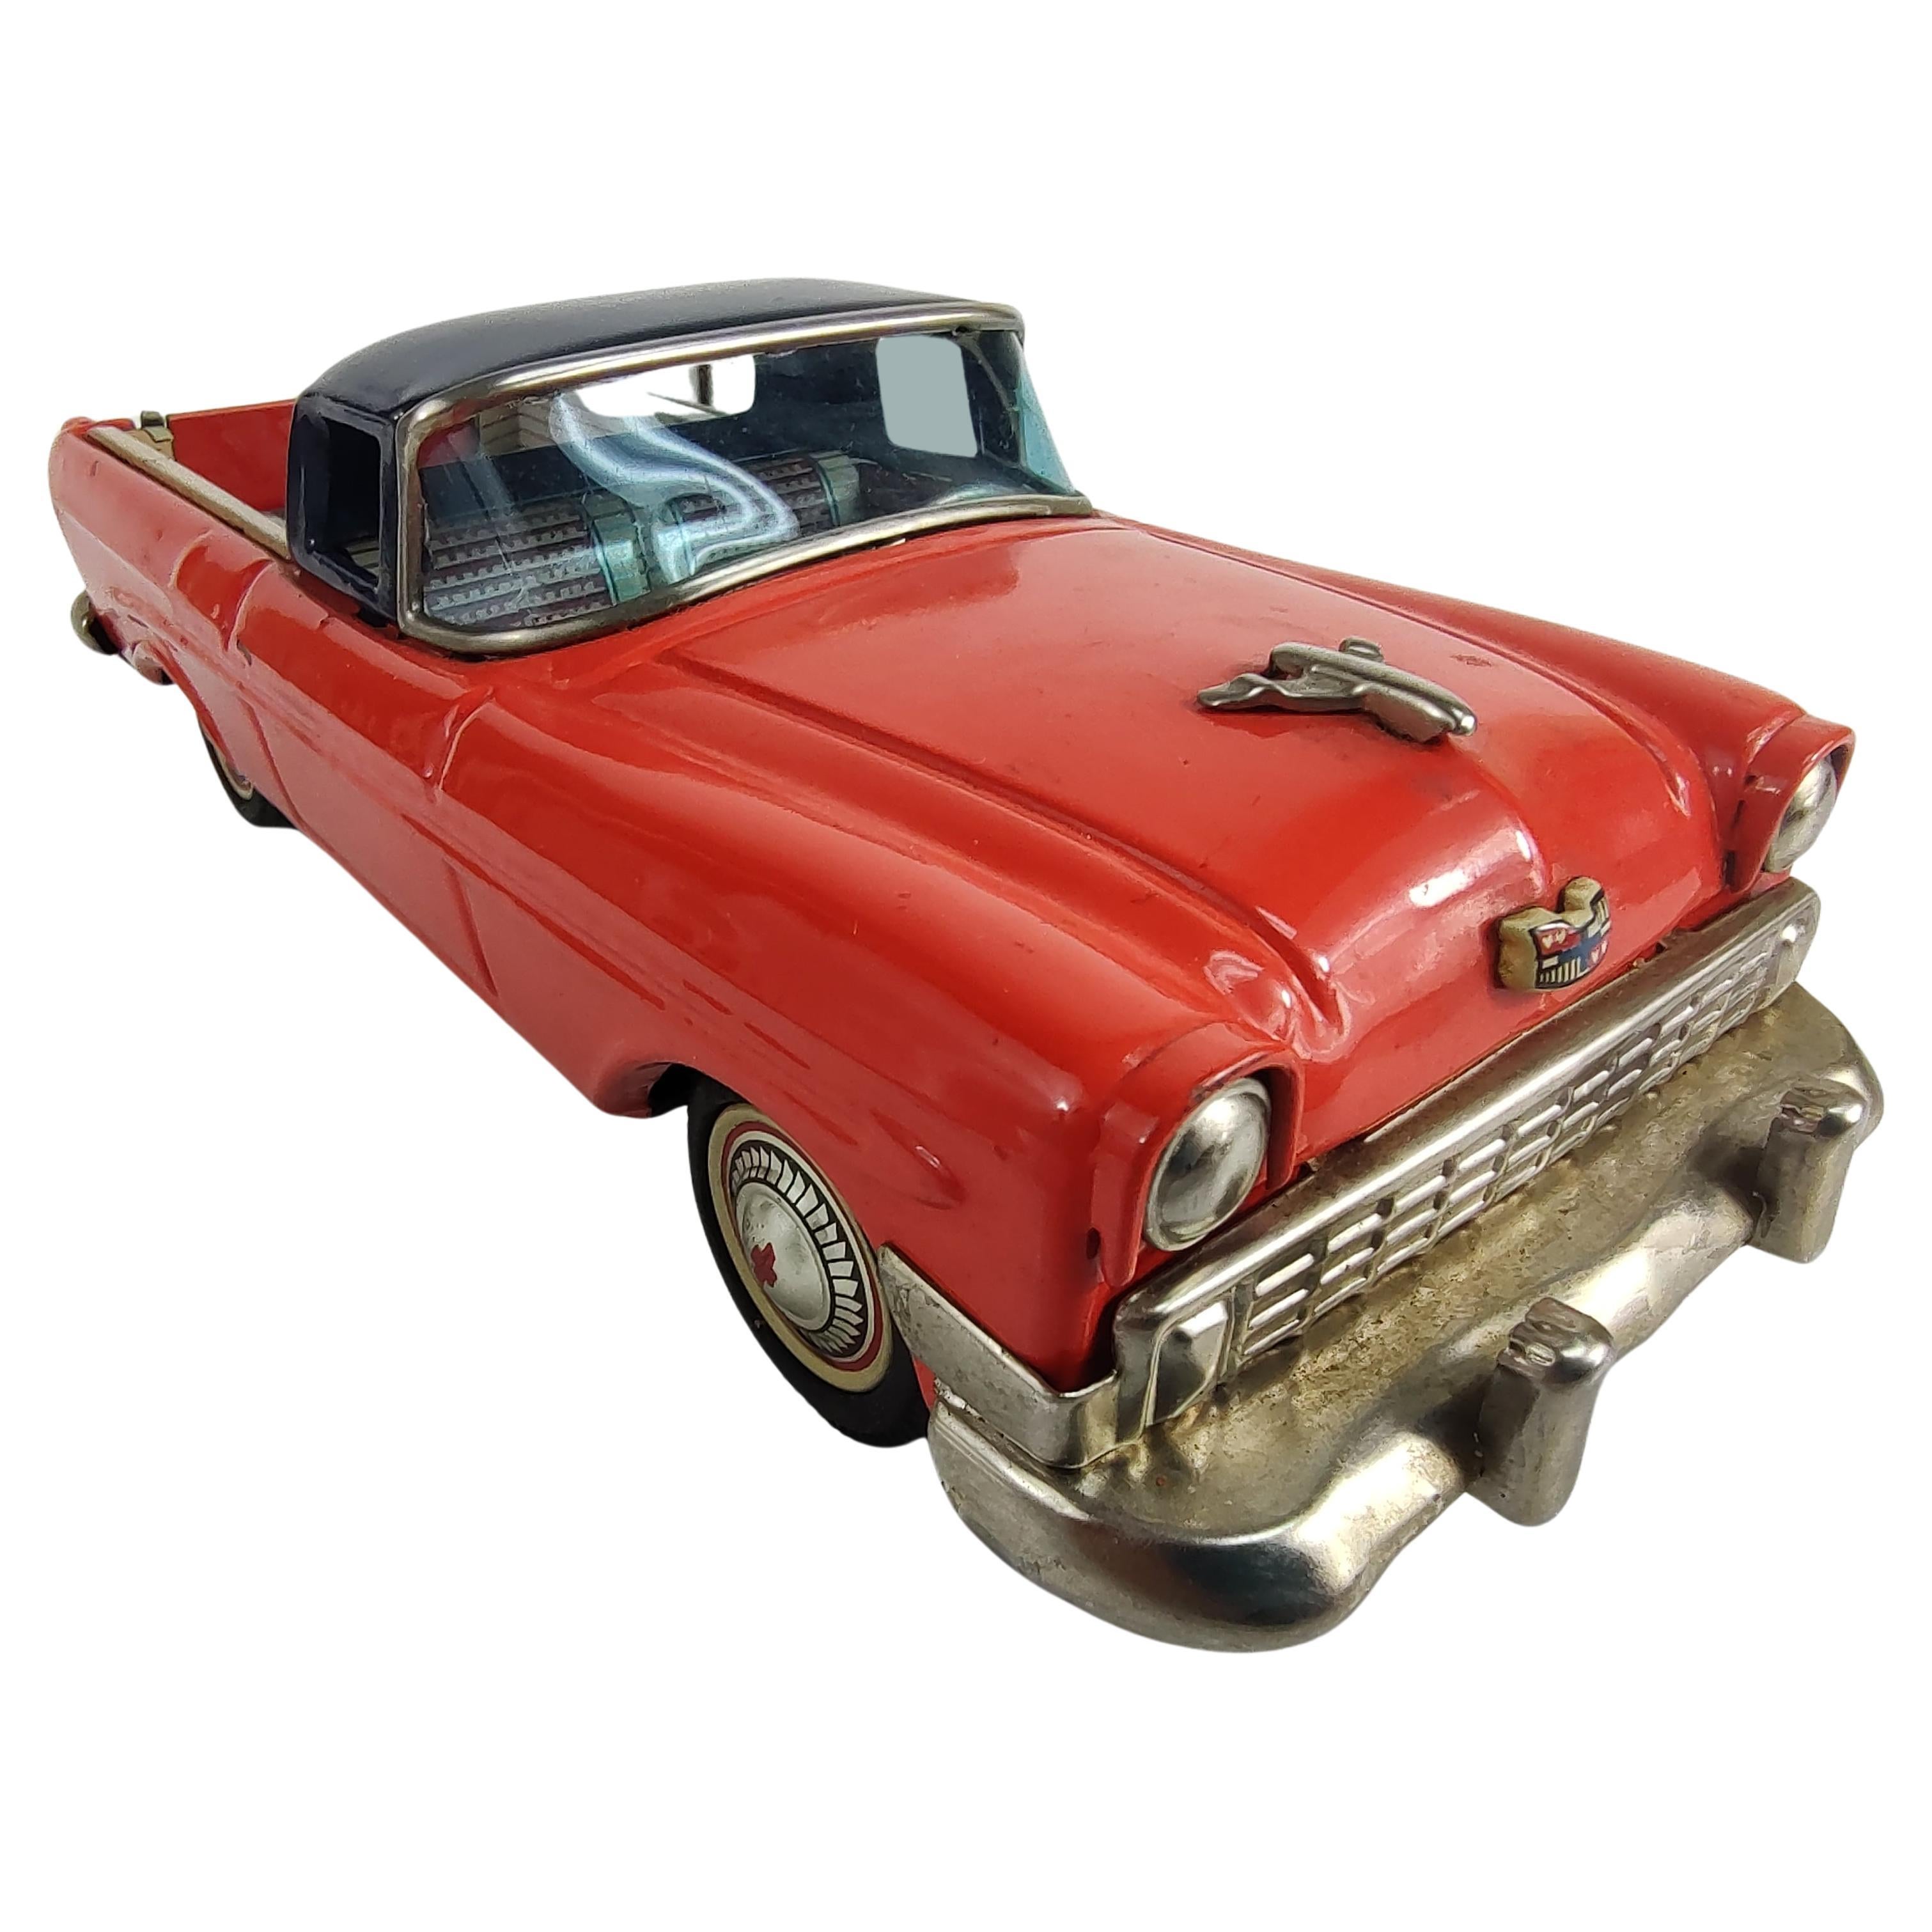 Mid Century Japanese Tin Litho Friction Toy Car Chevrolet El Camino C1956 For Sale 2